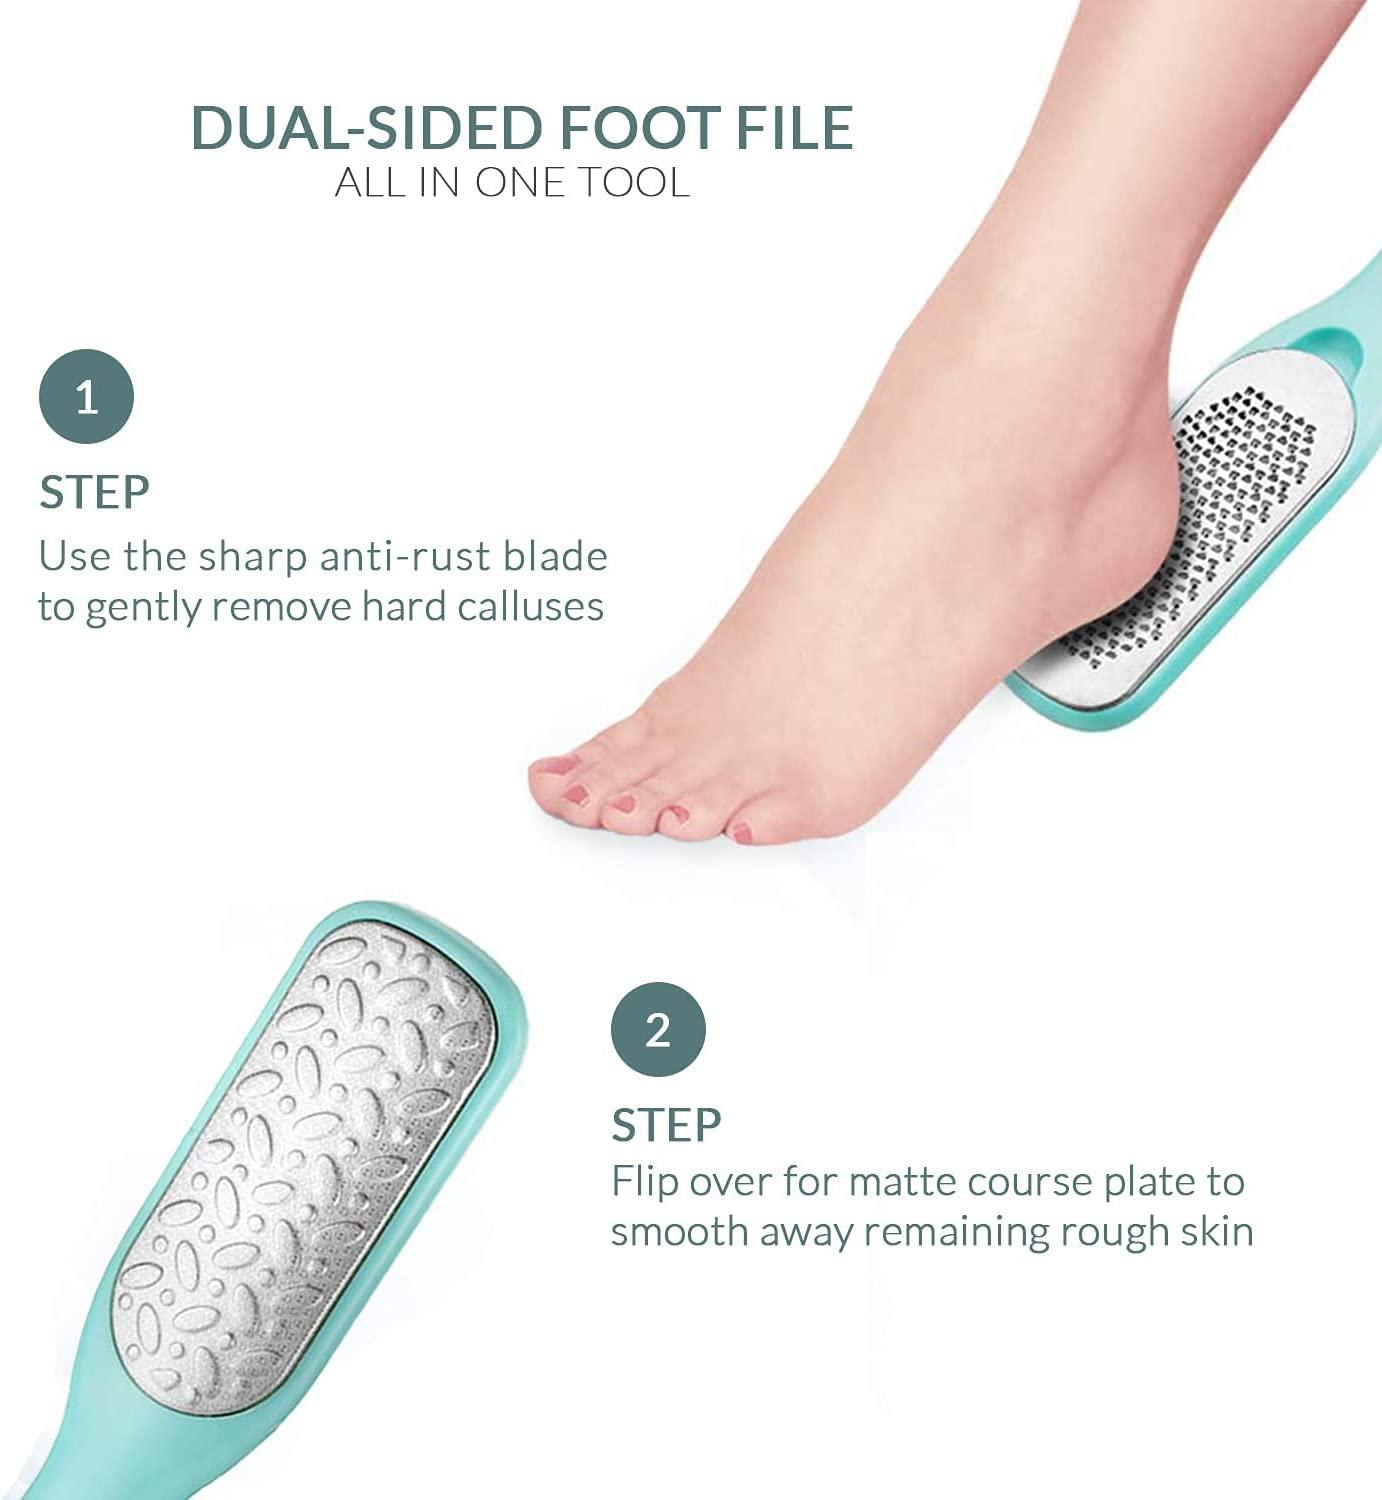 Callus Remover for Feet  Double-Sided Foot Scrub -Foot File -Dead Skin  Remover -Foot Rasp for Exfoliation -Wet & Dry Feet Scrubber for Smoothing &  Softening Feet -Pedicure Tool for Foot Care